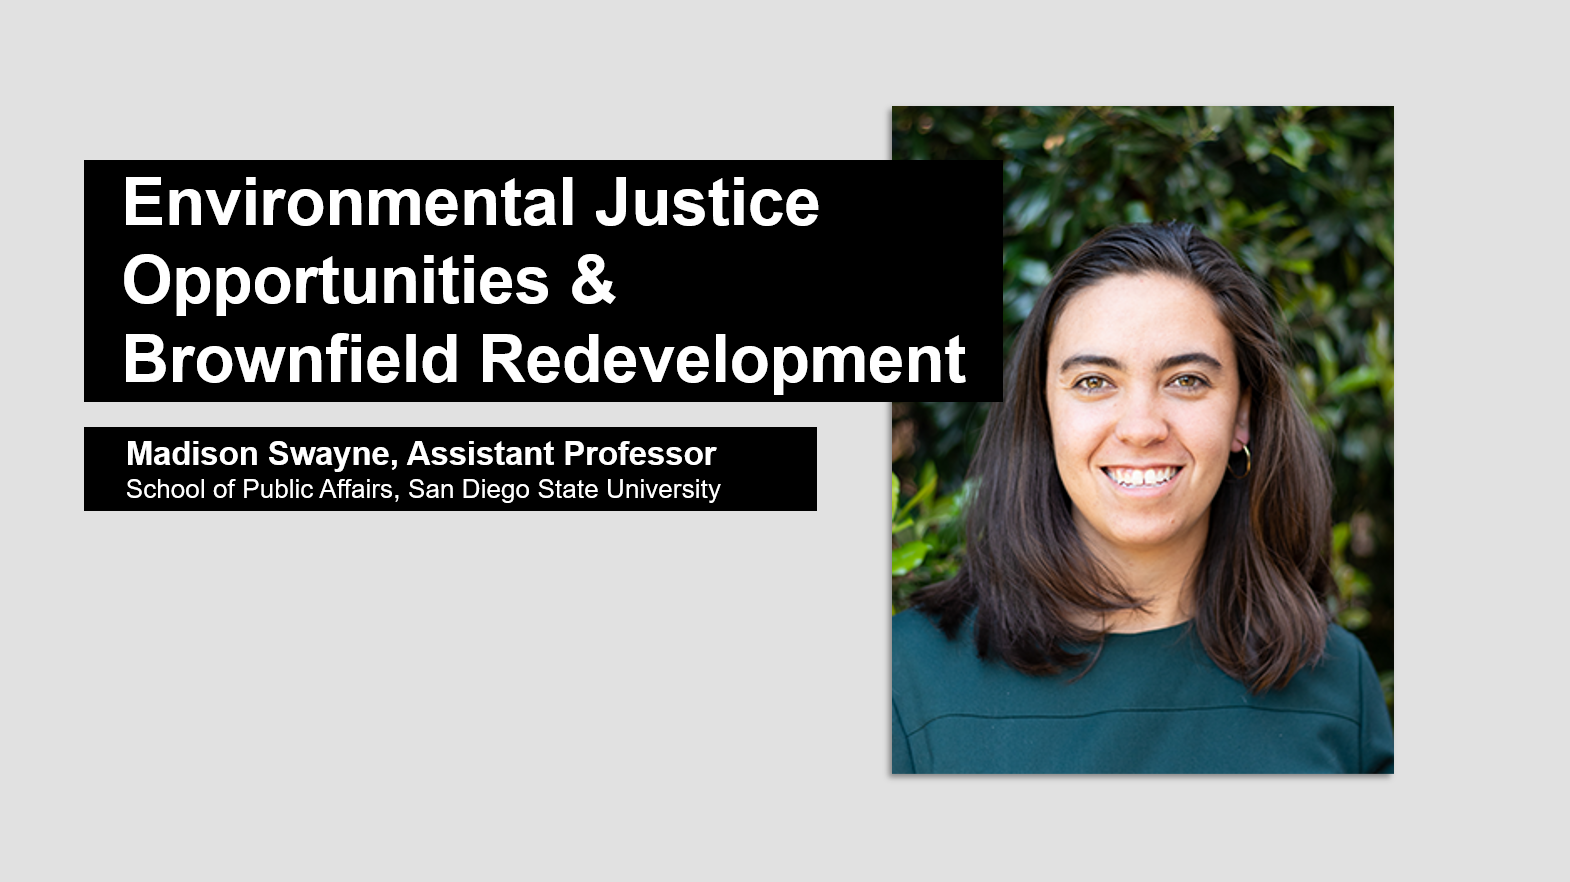 Gibbs College to Host Madison Swayne Lecture, “Environmental Justice Opportunities & Brownfield Redevelopment,” on March 31